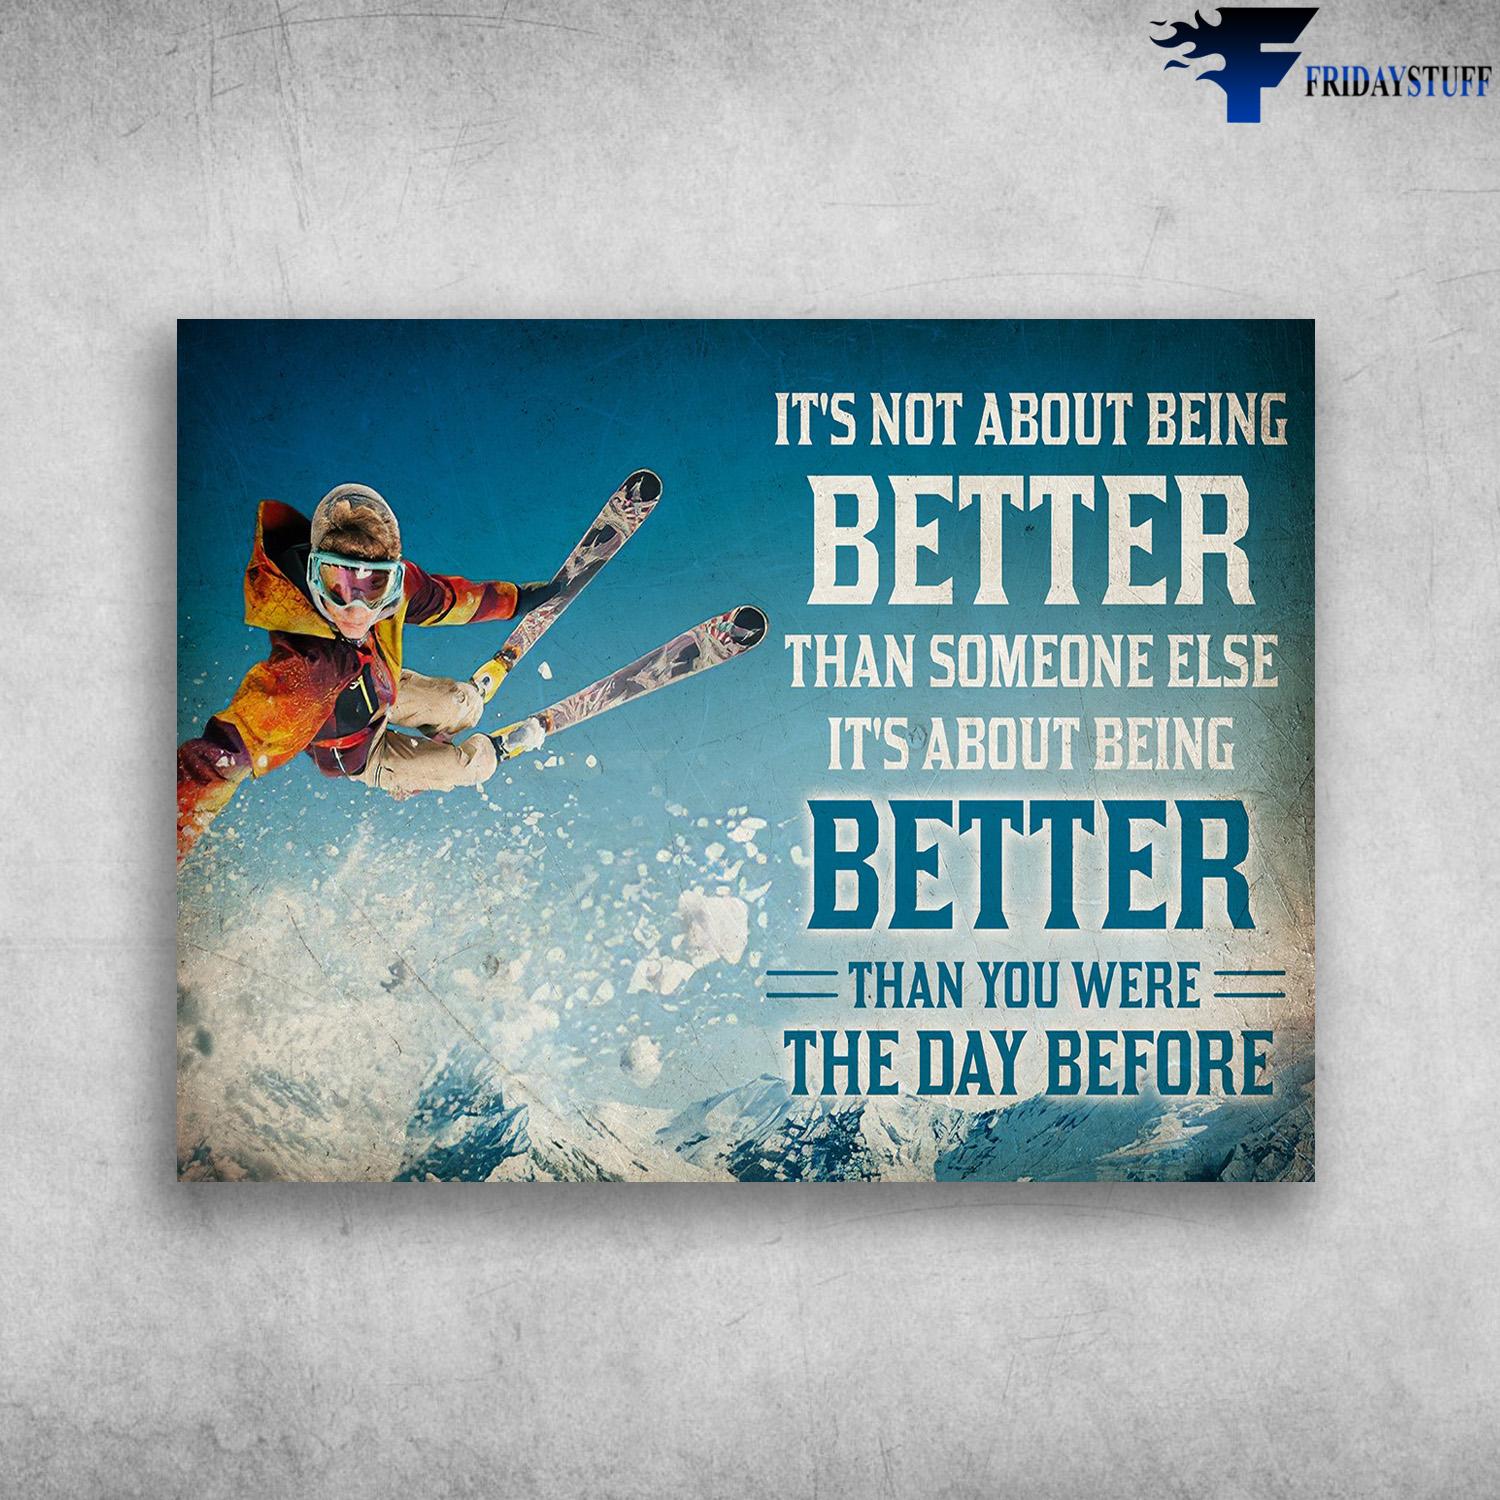 Skiing Poster, Skiing Lover, It's Not About Being Better Than Someone Else, It's About Being Better Than You Were The Day Before